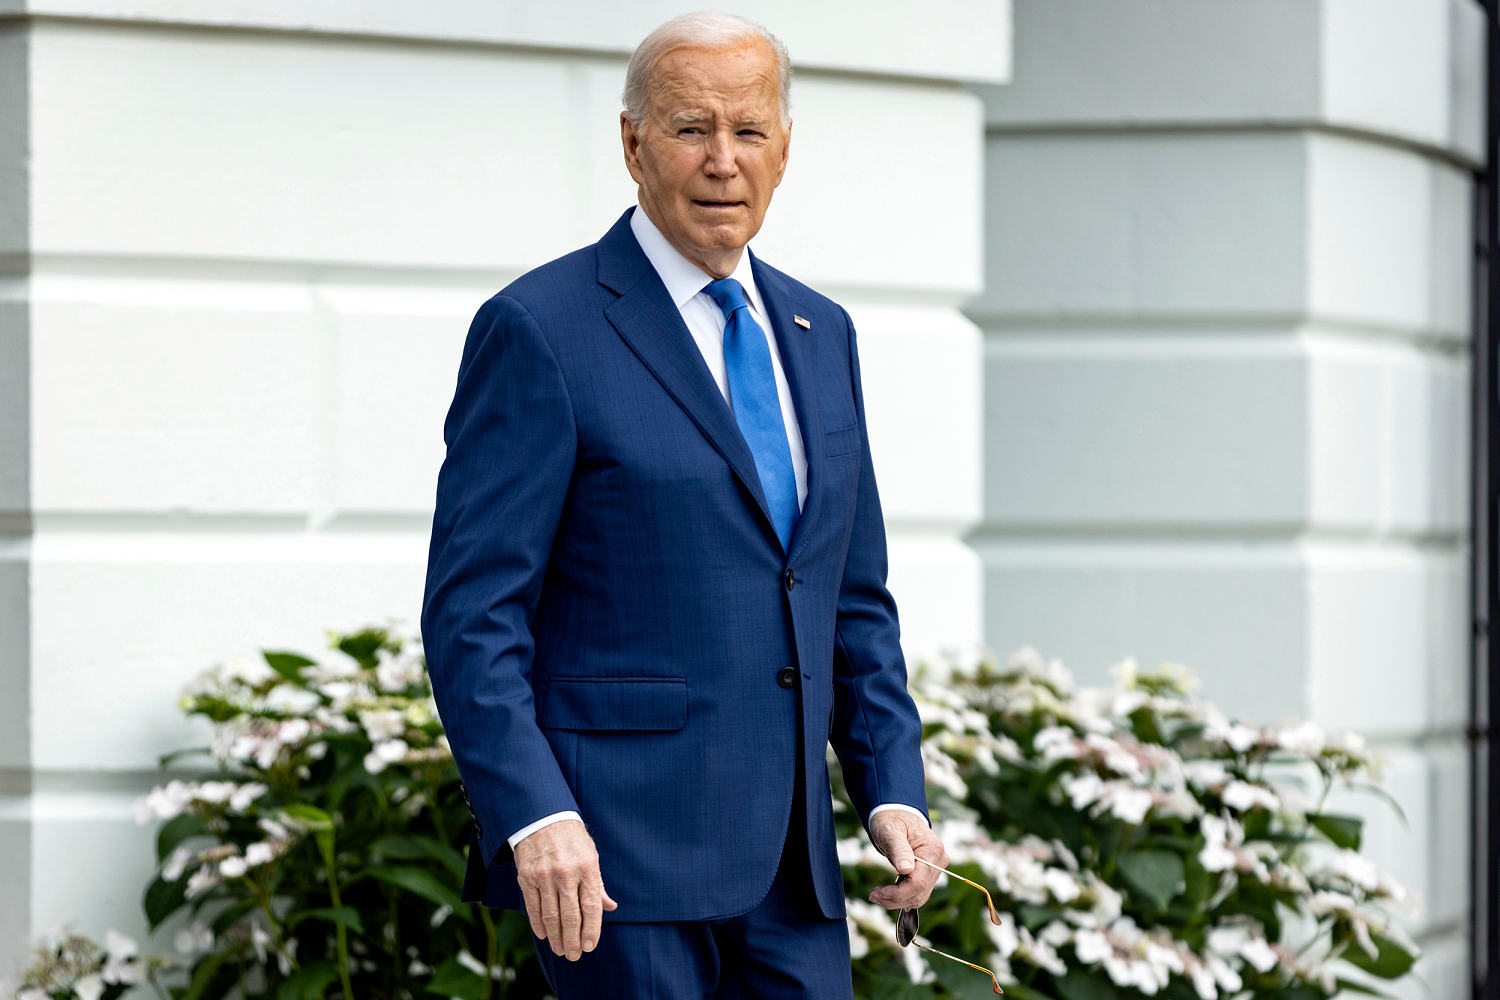 Ohio lawmakers are at odds over effort to ensure Biden appears on November ballot